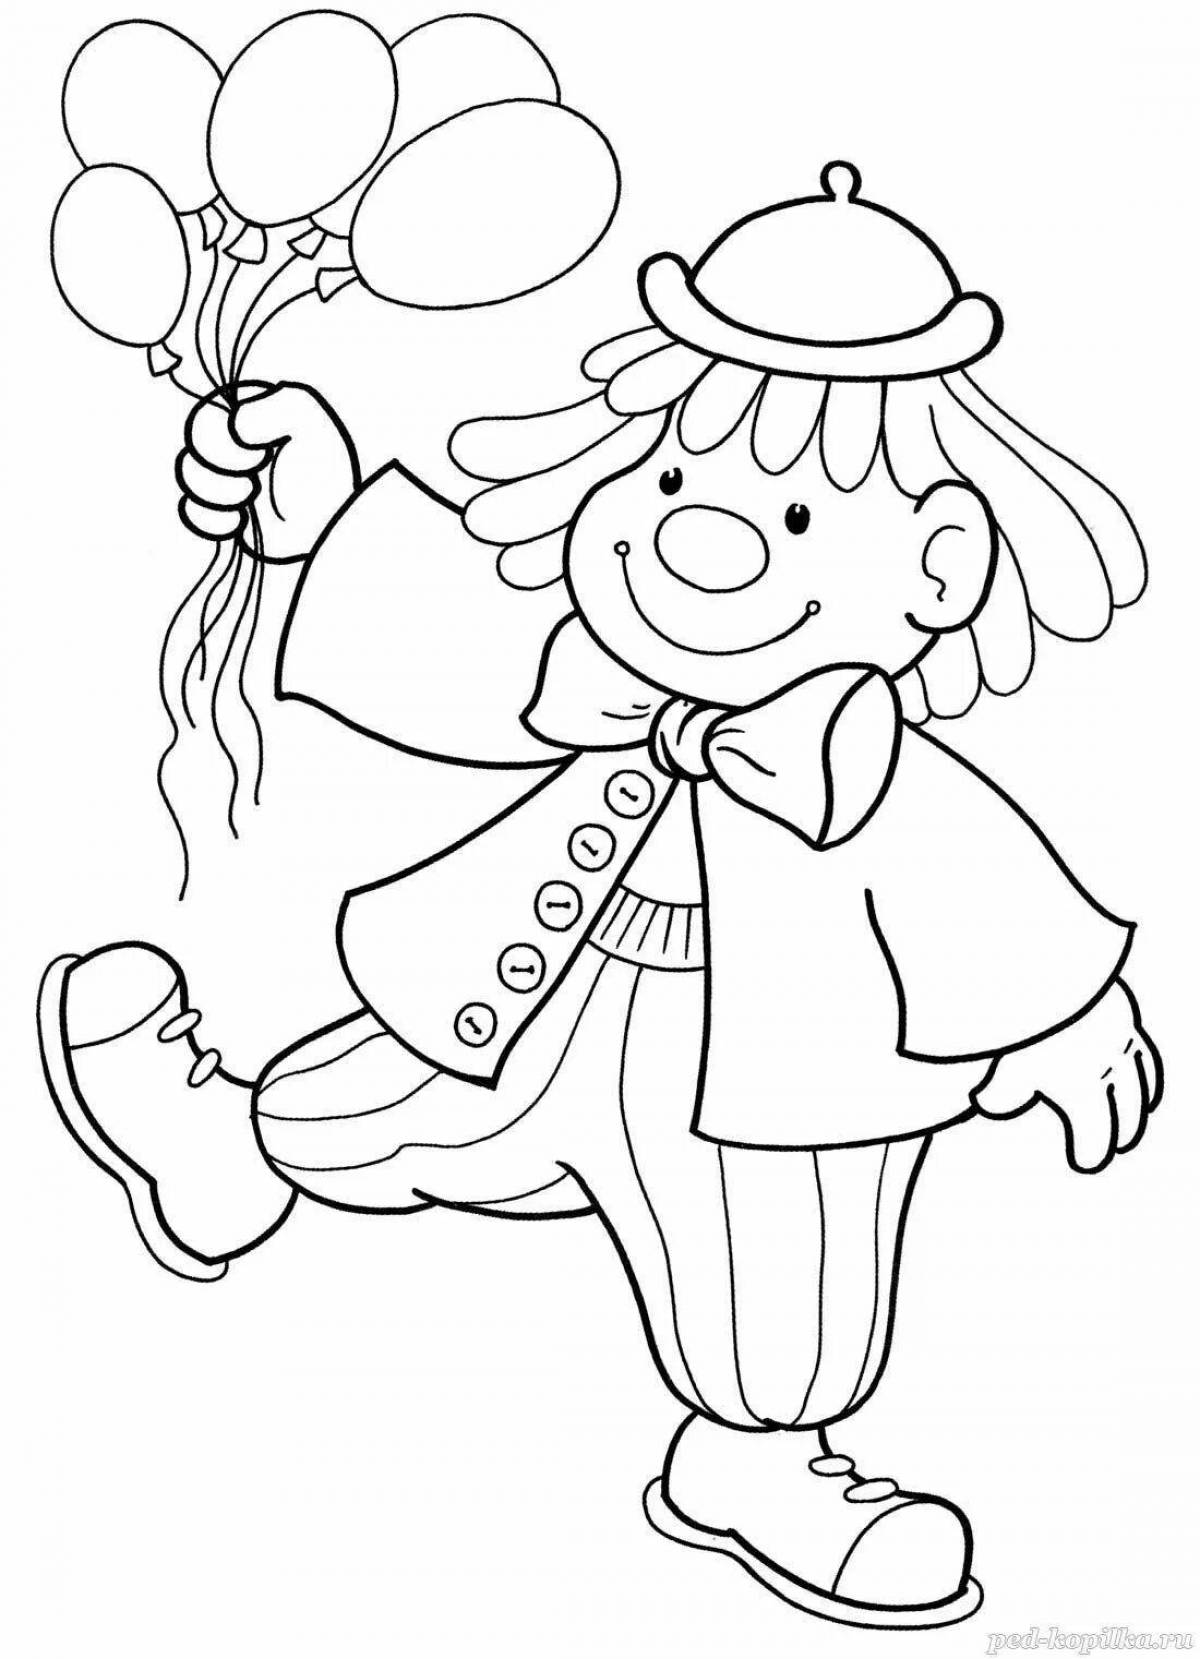 Colorful clown coloring for preschoolers